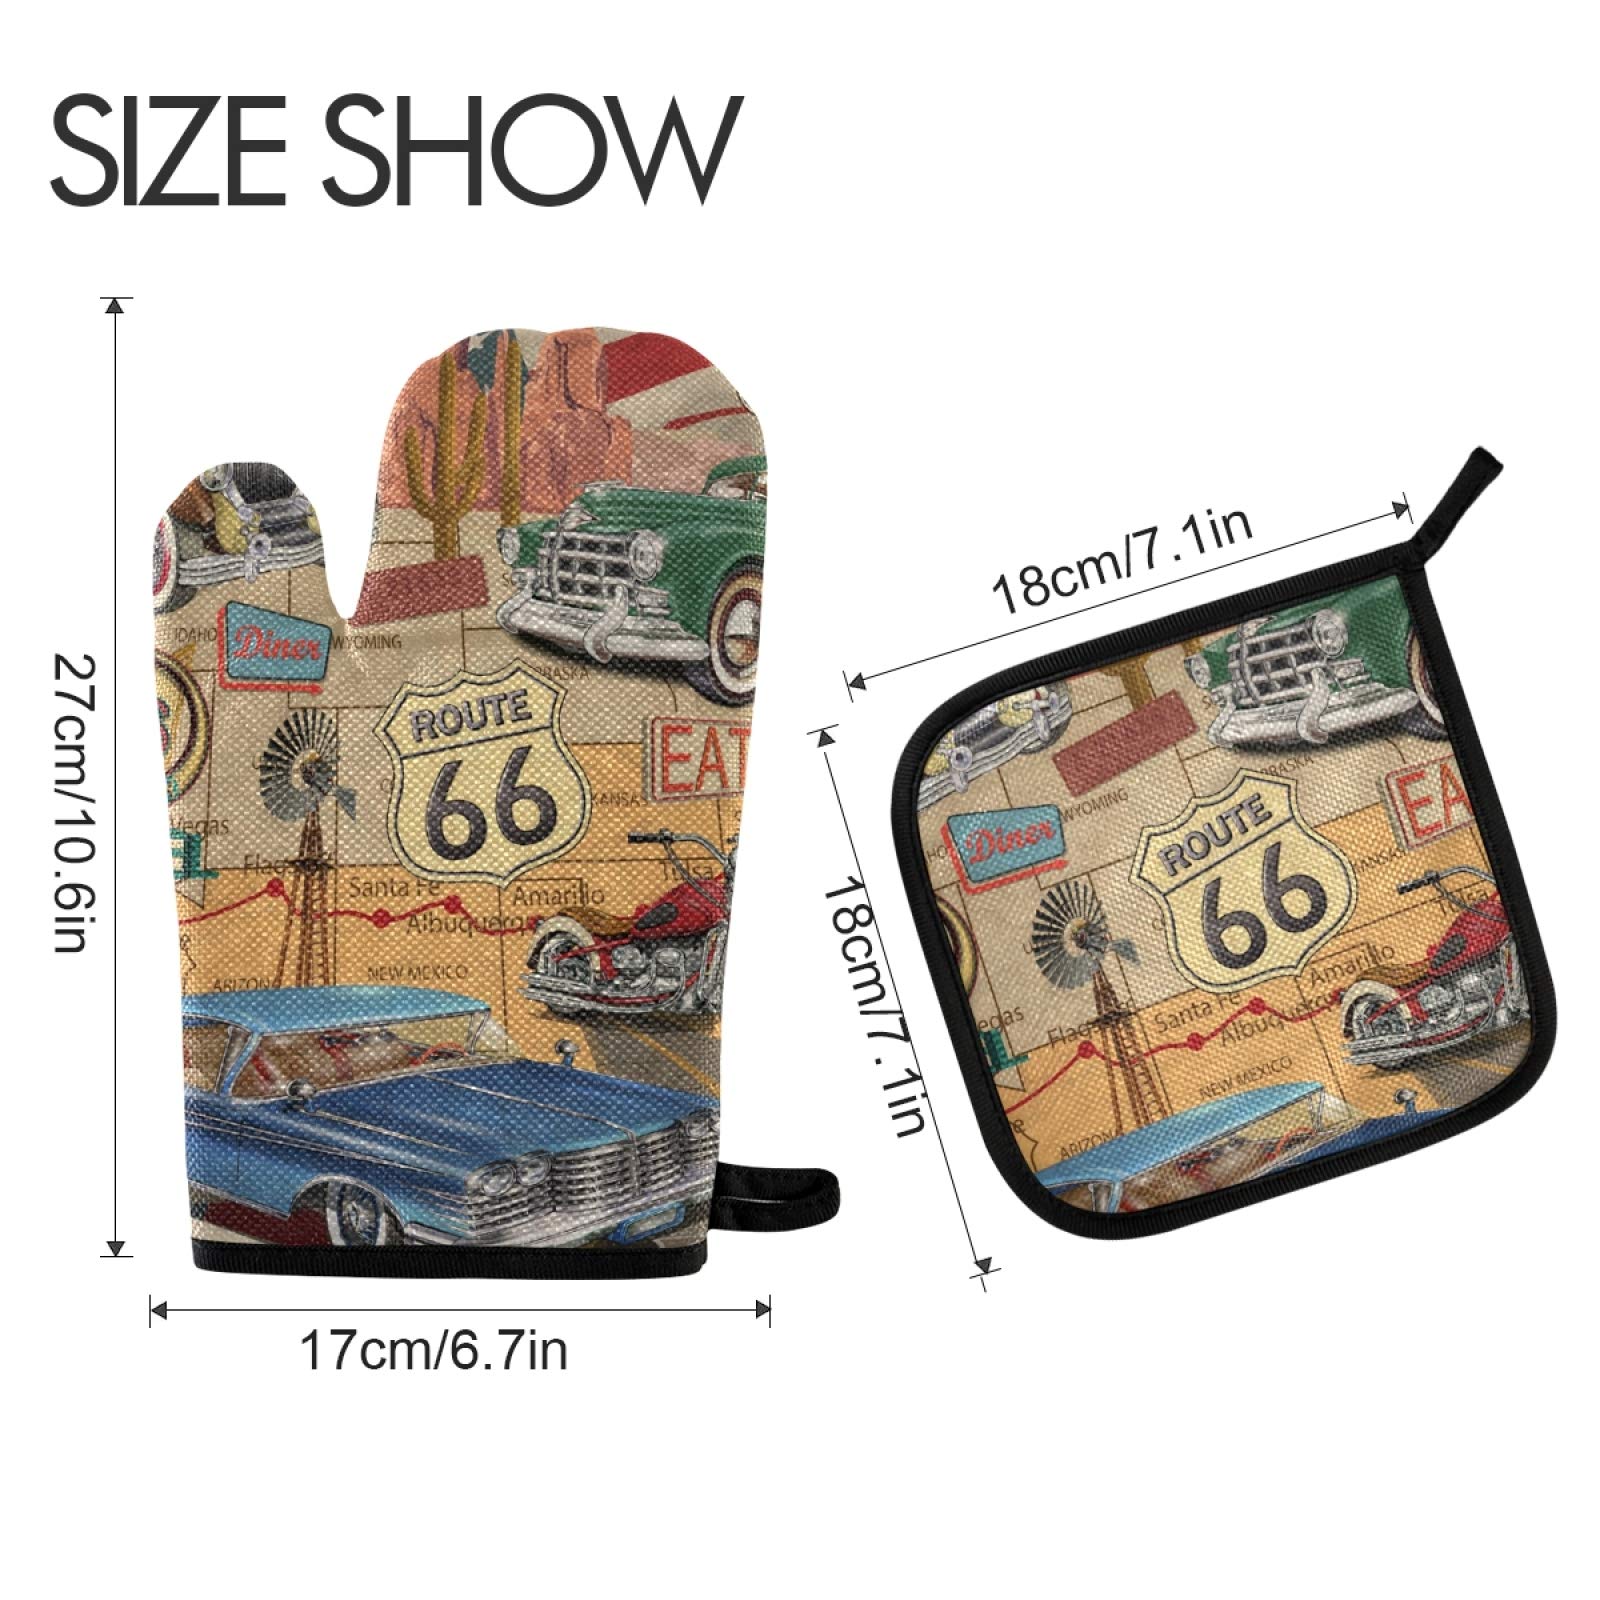 OURVII 2 pcs Vintage Route 66 Oven Mitts and Pot Holders Set Retro Car Hot Pads Kitchen Oven Gloves for Women Men Baking Cooking